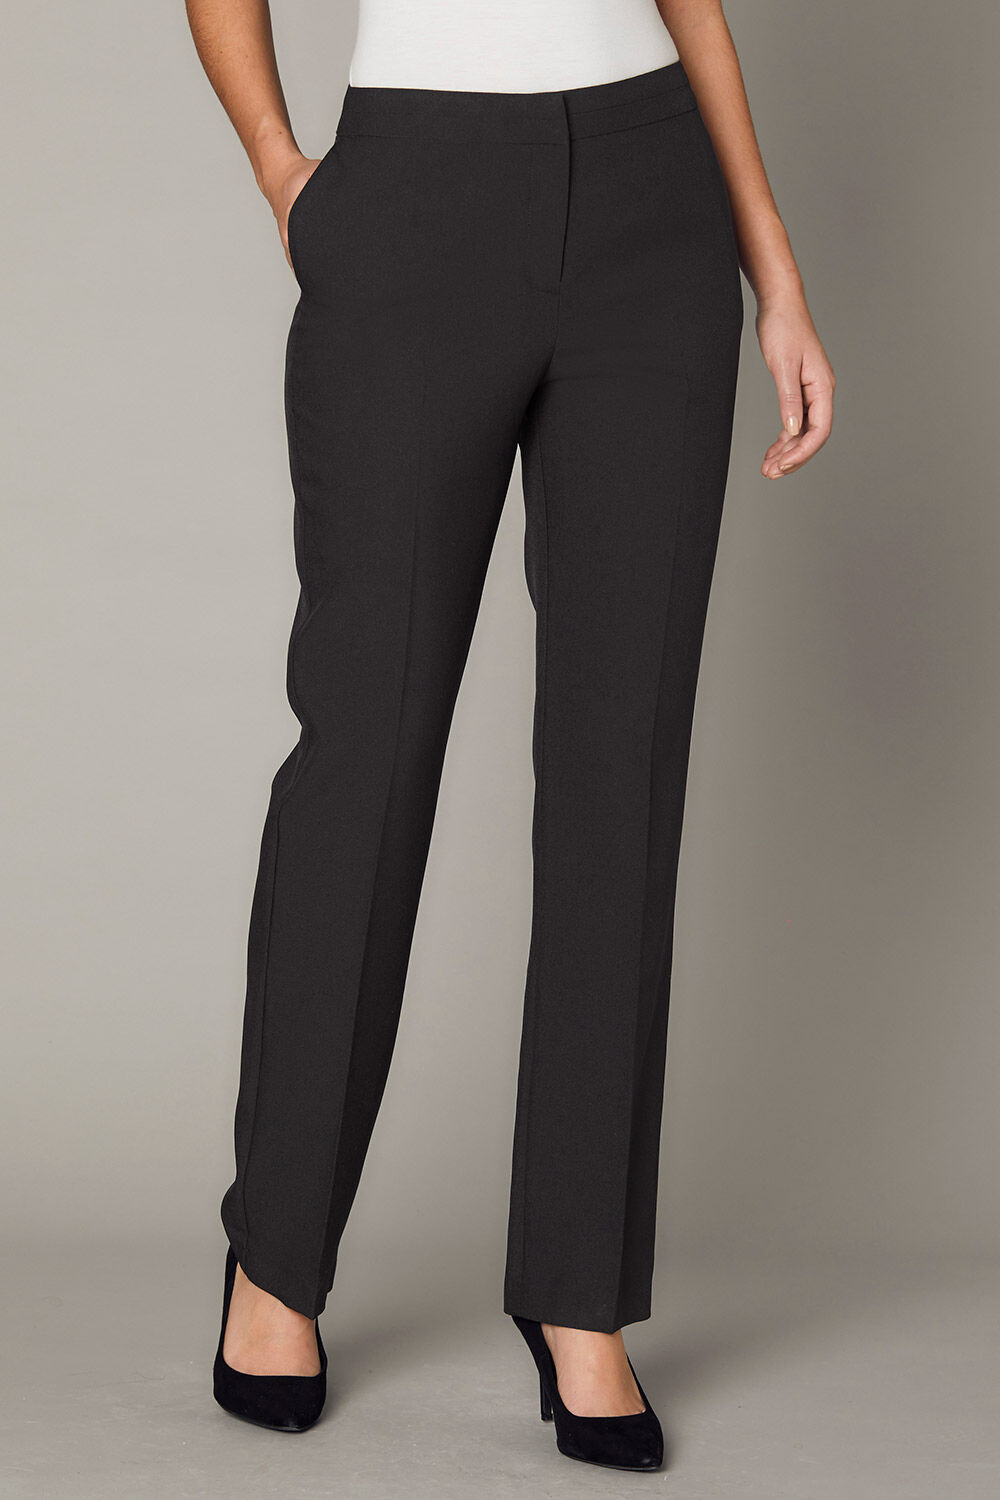 Buy Black Tapered Leg Trousers With Stretch  20R  Trousers  Tu